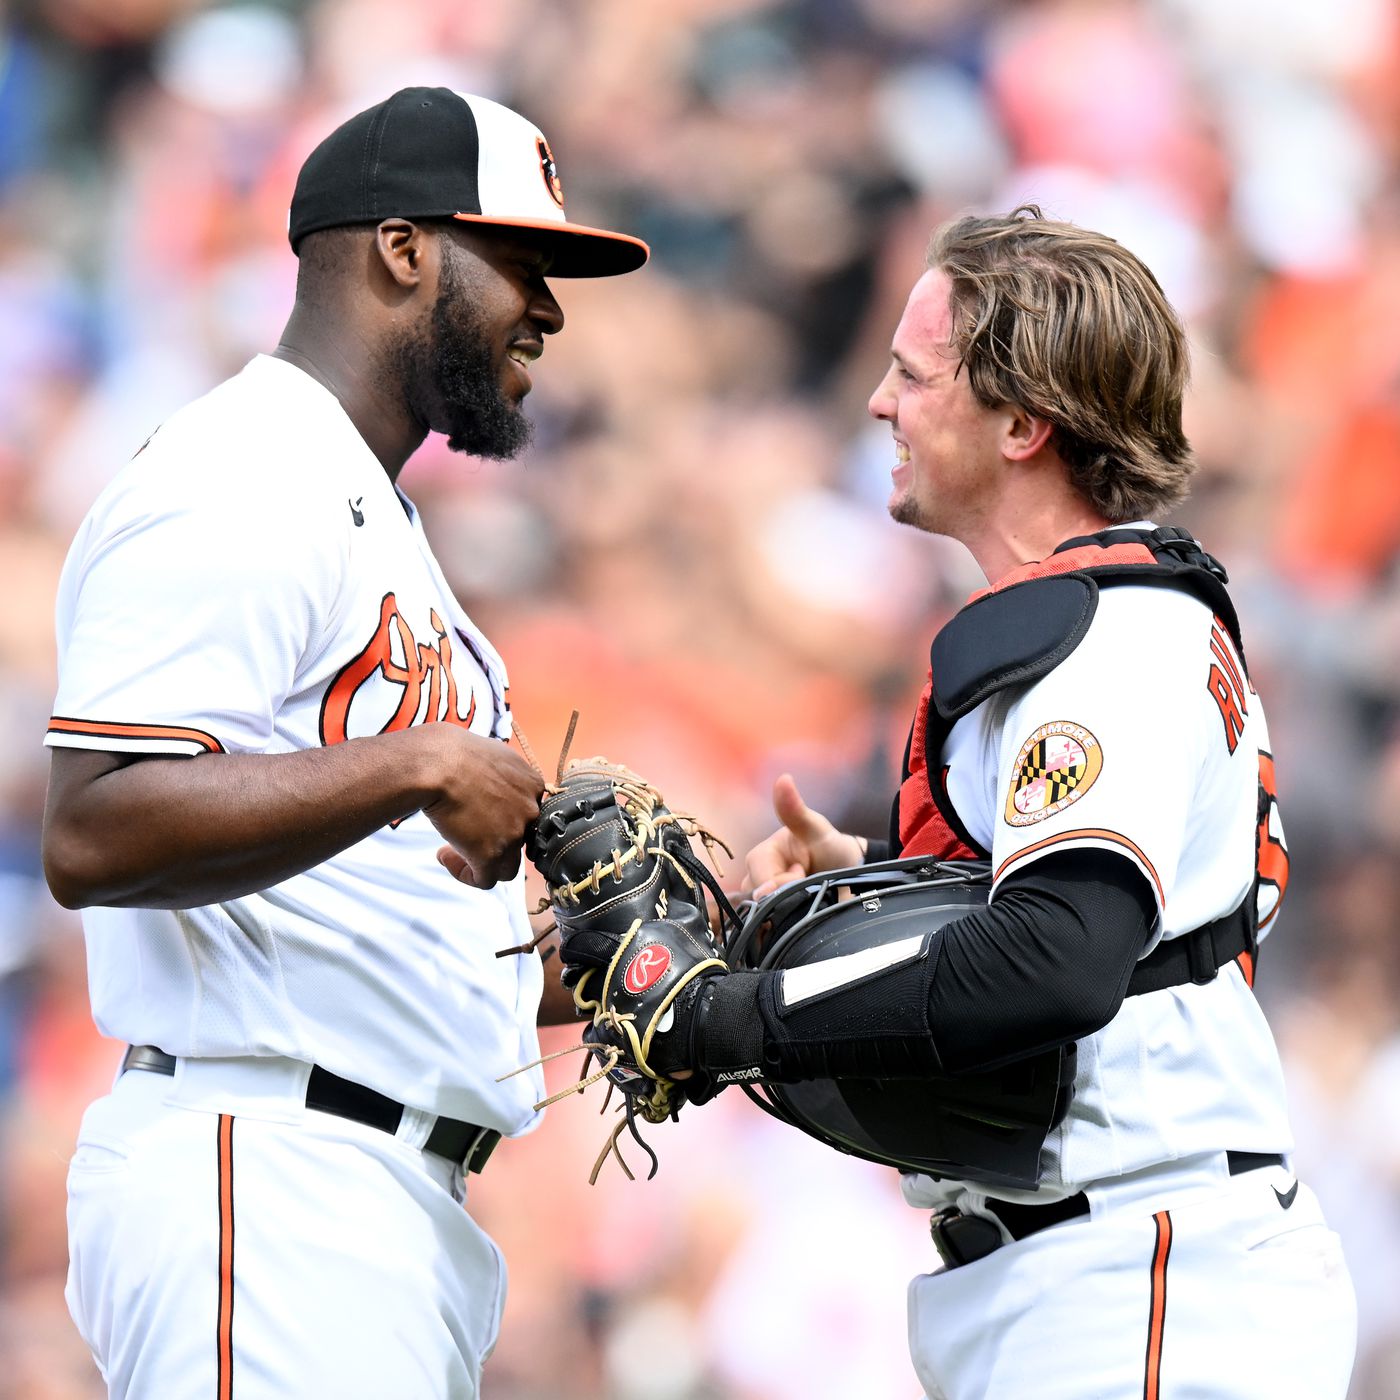 2013 MLB All Star Game: Get to know Baltimore Orioles All Star